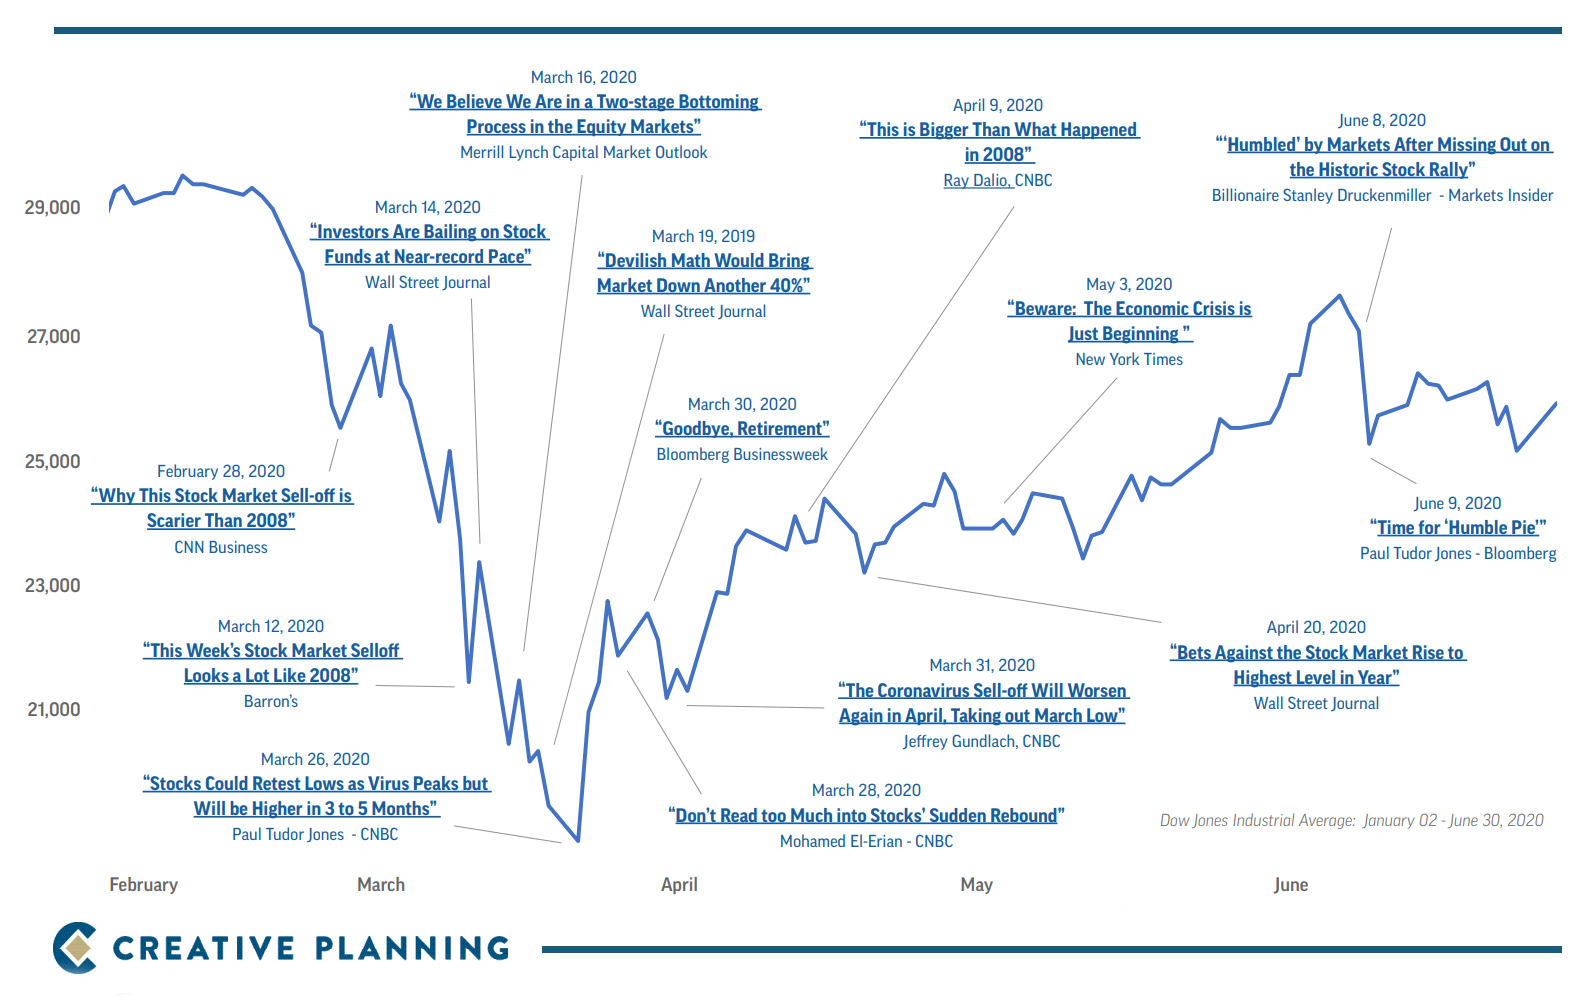 This chart shows several negative headlines from several news organizations (and where the S&P 500 was when these headlines came out) as well as how incorrect many were, as things got better in the market over time rather than worse, as predicted by these outlets.